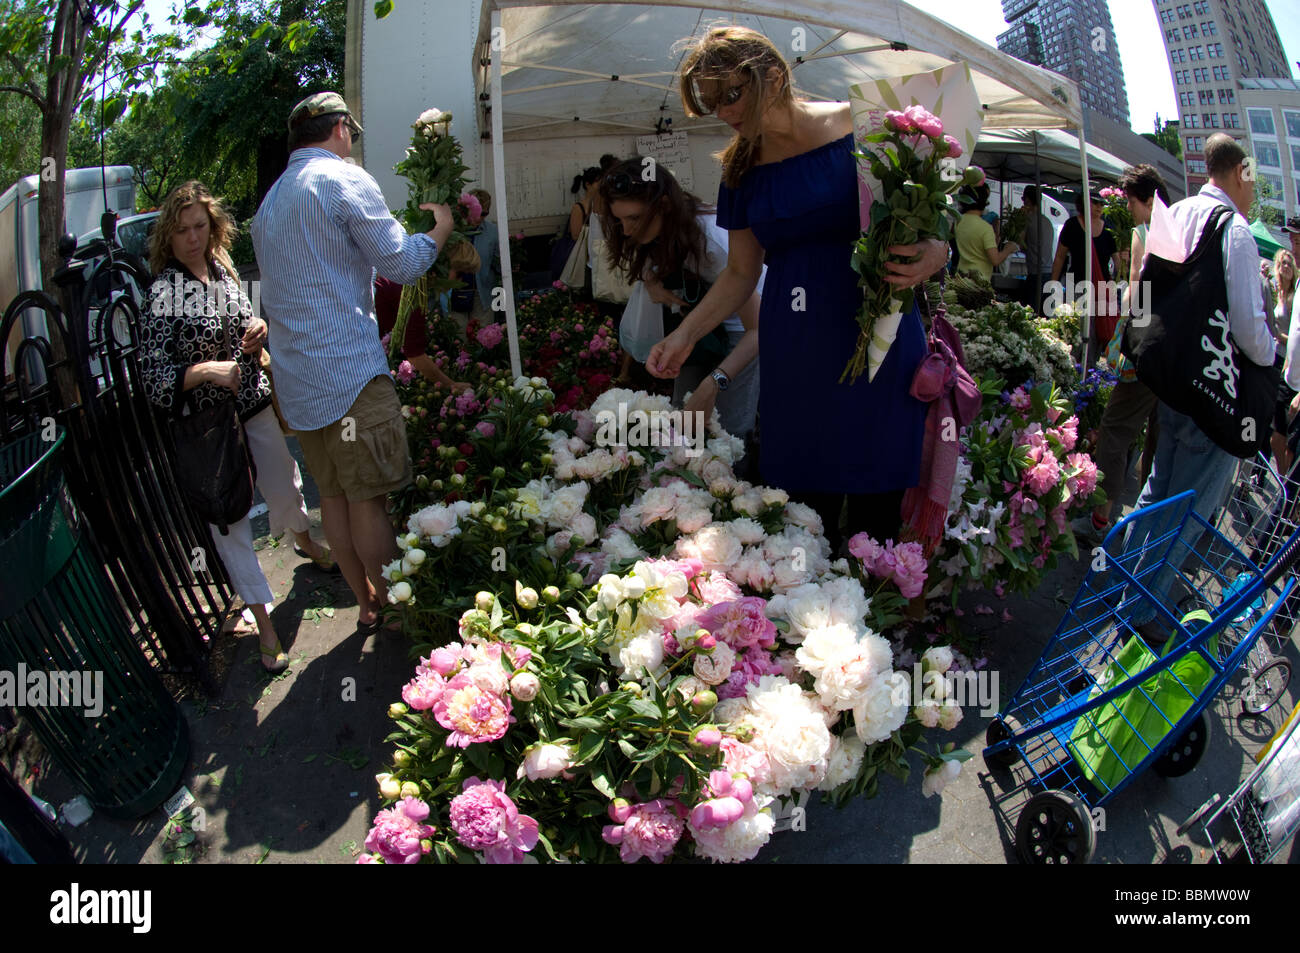 Flowers on sale at farmers stands in the Union Square Greenmarket in New York on Saturday May 23 2009 Frances M Roberts Stock Photo